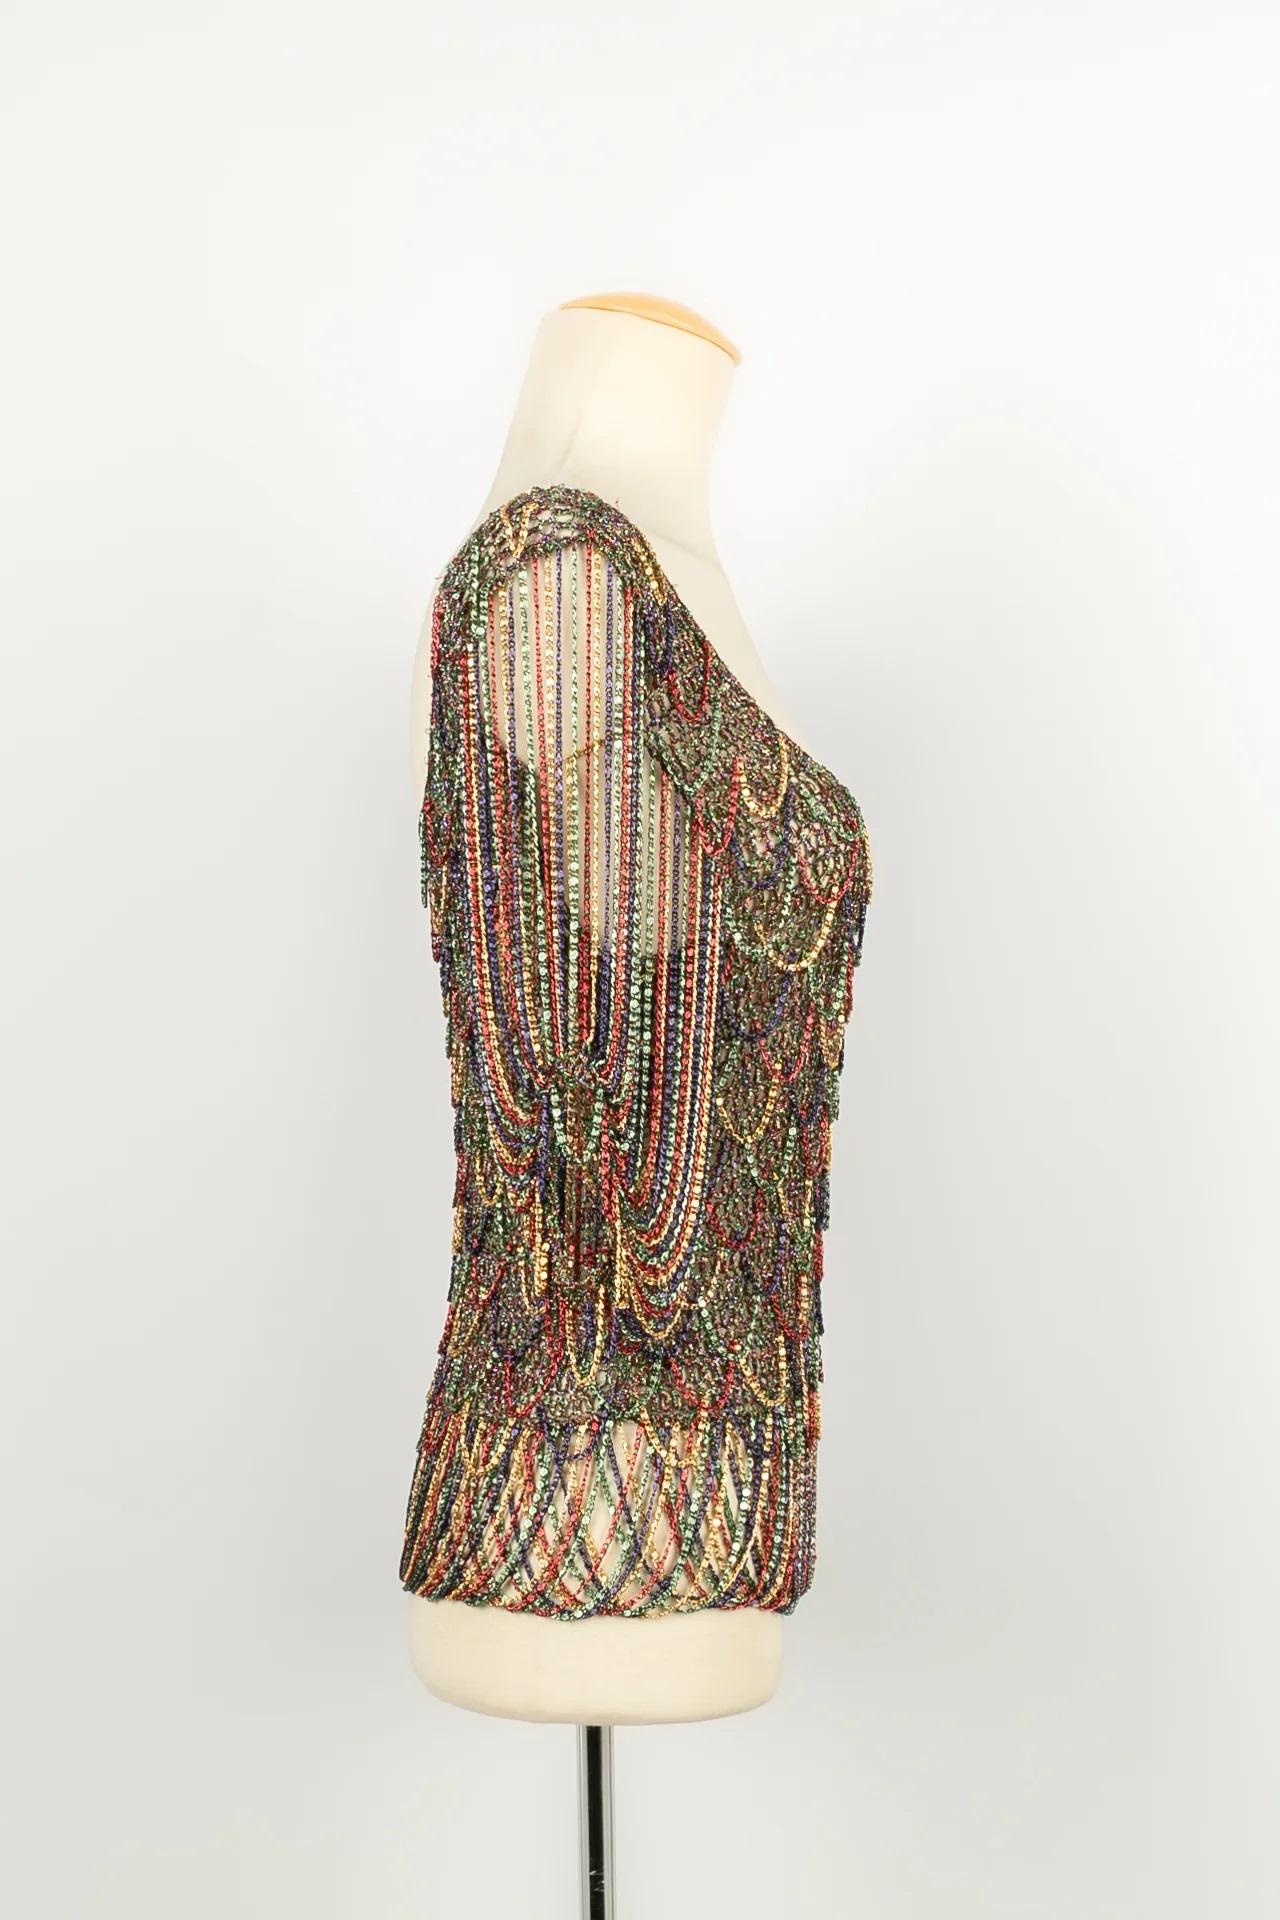 Women's Azzaro Top in Multicolored Lurex Enlivened with Chains, 1970s